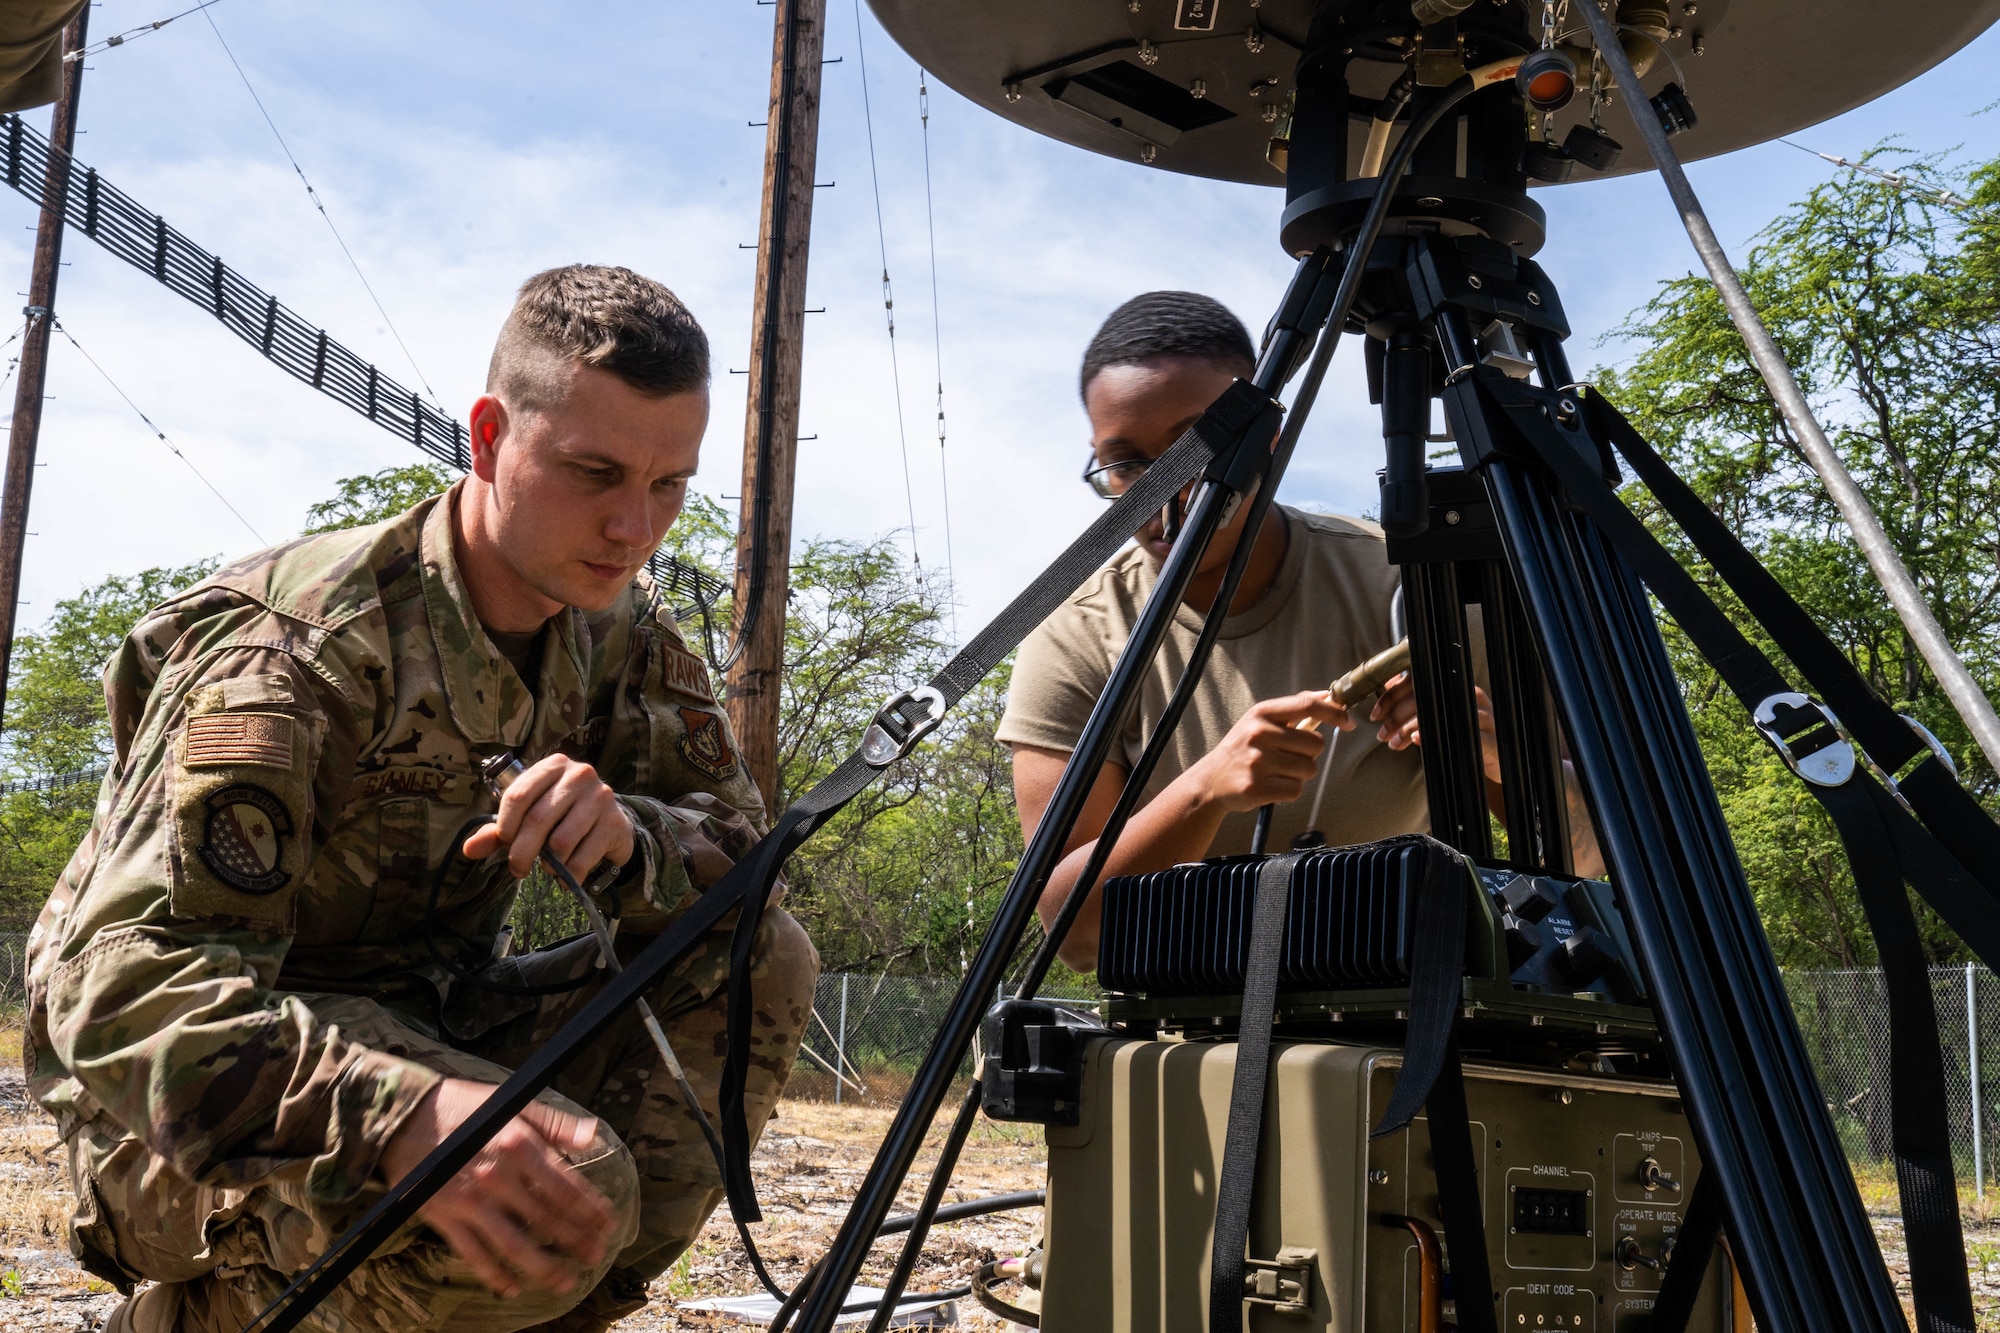 Senior Airman Troy Stanley, 15th Operation Support Squadron Radar, Airfield and Weather Systems Shop, connects the azimuth monitor to the Tactical Navigation System for a training exercise at Joint Base Pearl Harbor-Hickam, Hawaii, March 15, 2022. The TACAN is a radio air-navigation system that provides aircrew distance information as a guide to show their geographical location and is usually used by combat controllers in remote airfields. (U.S. Air Force photo by Airman 1st Class Makensie Cooper)